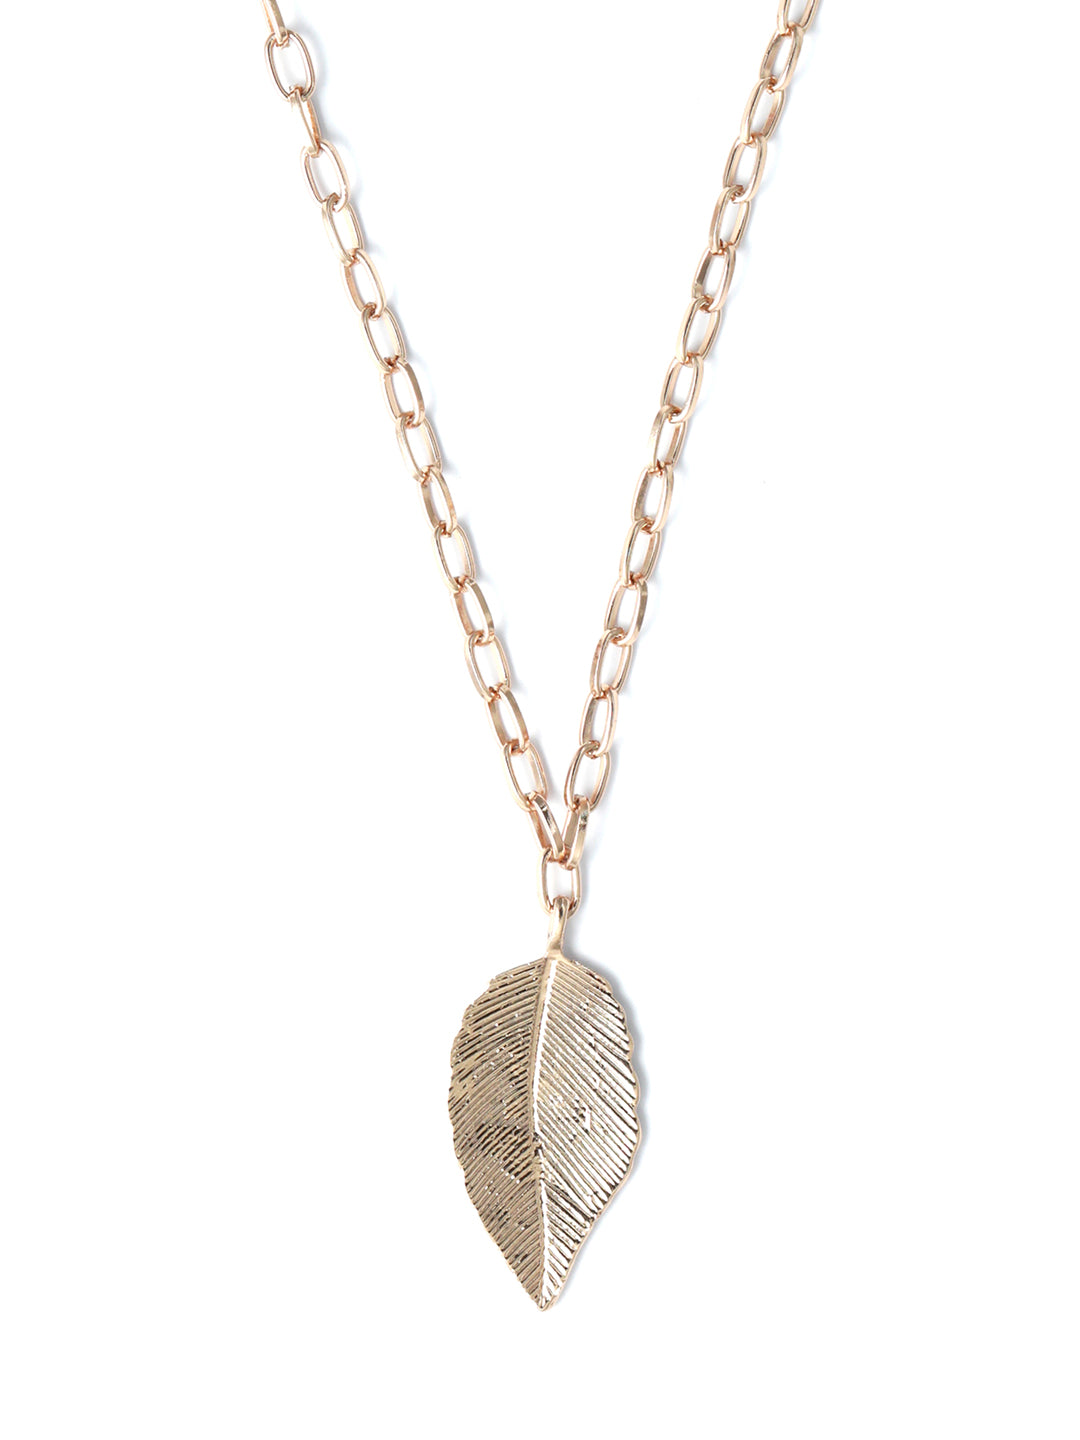 Prita Single Leaf Linked Chain Style Necklace